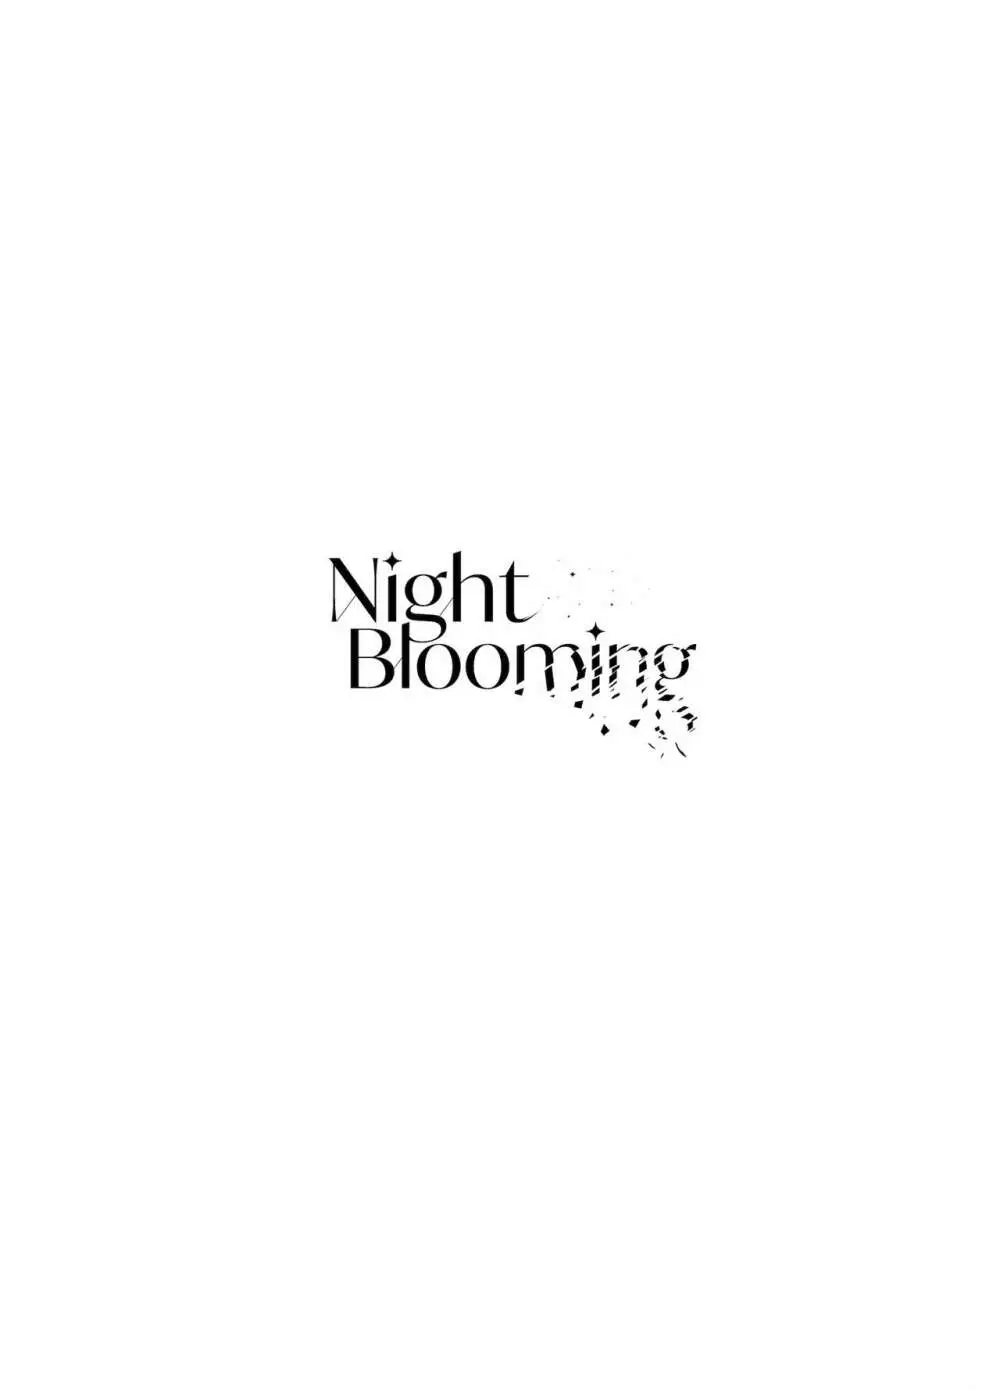 Night Blooming Page.2